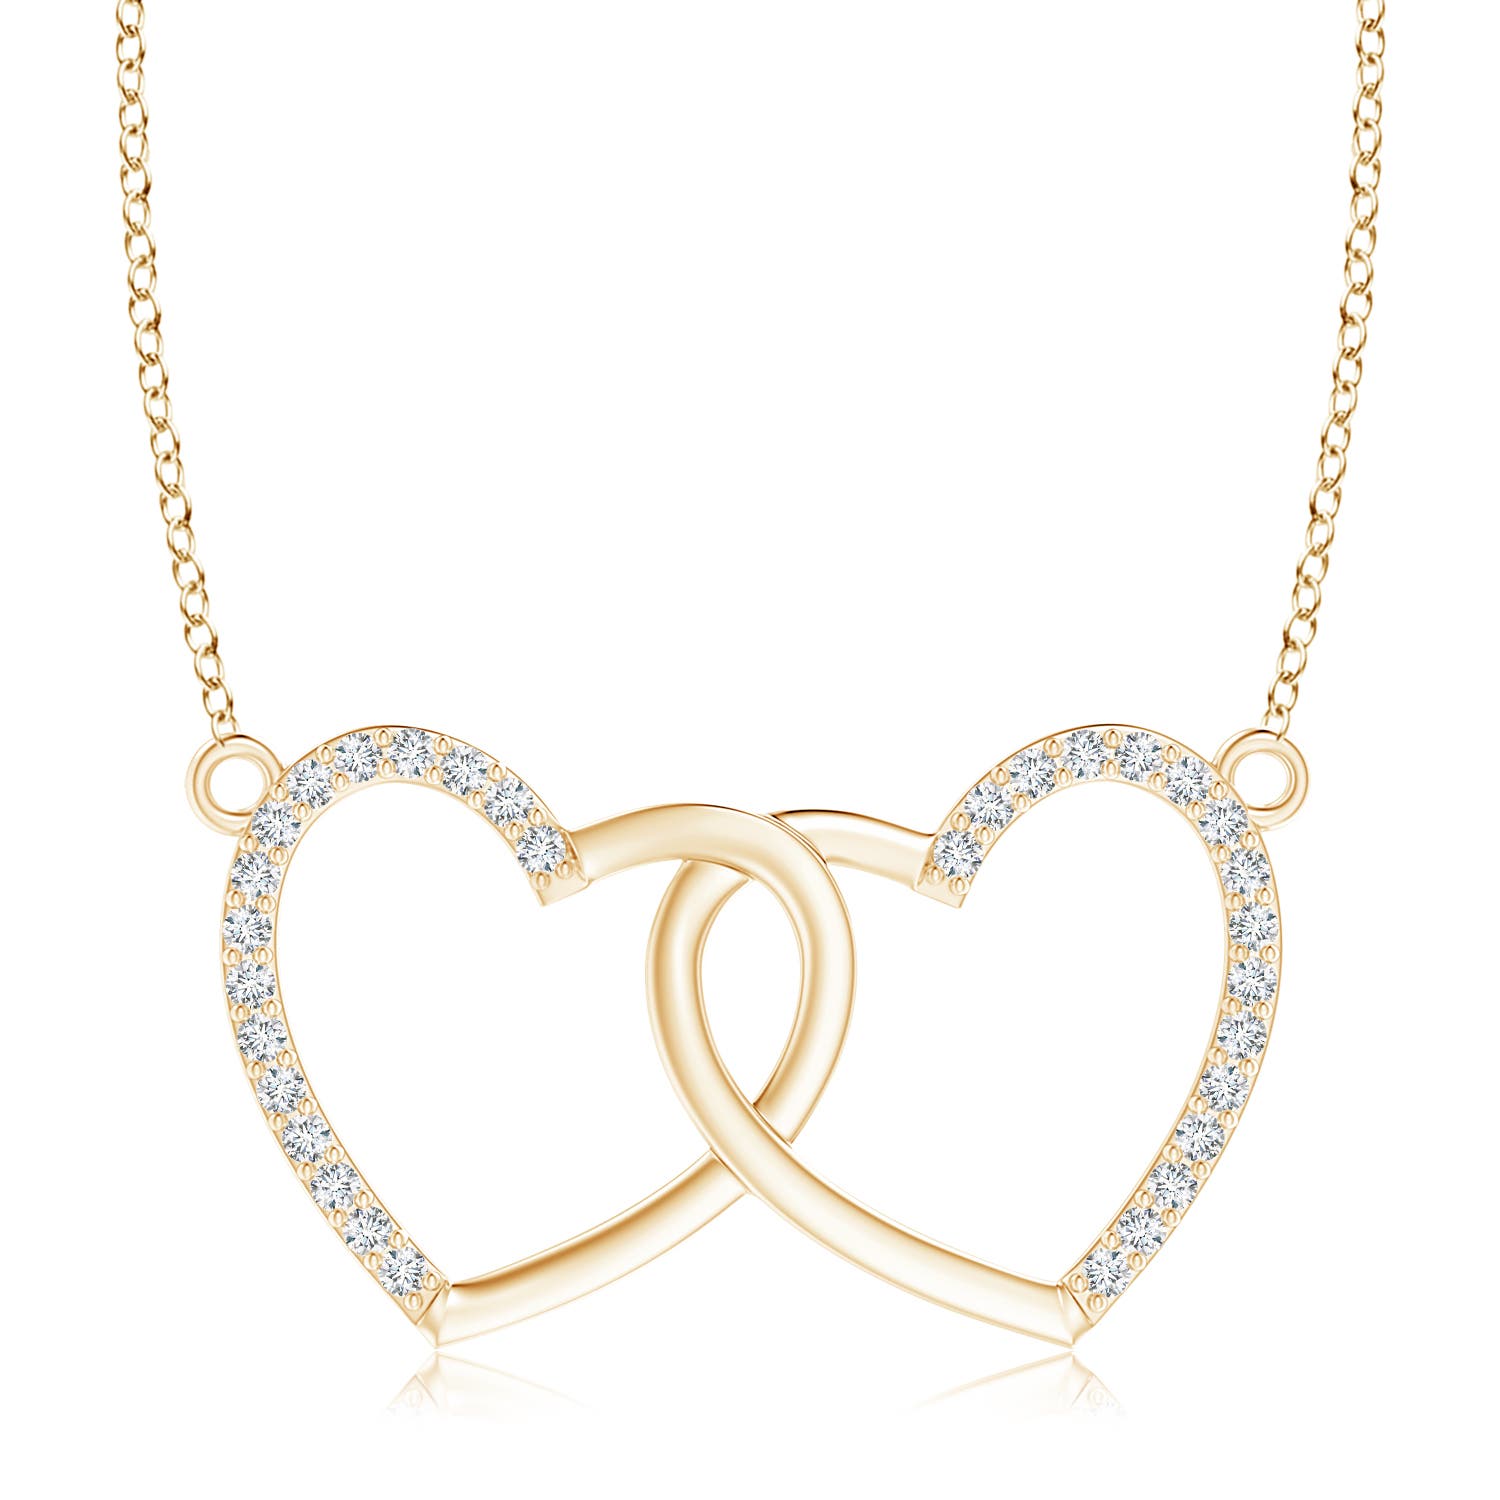 Buy Interlocking Hearts Necklace, Gold Two Hearts Necklace, Gold Double Heart  Necklace, Gold Entwined Hearts, Gold Dainty Double Hearts Necklace Online  in India - Etsy